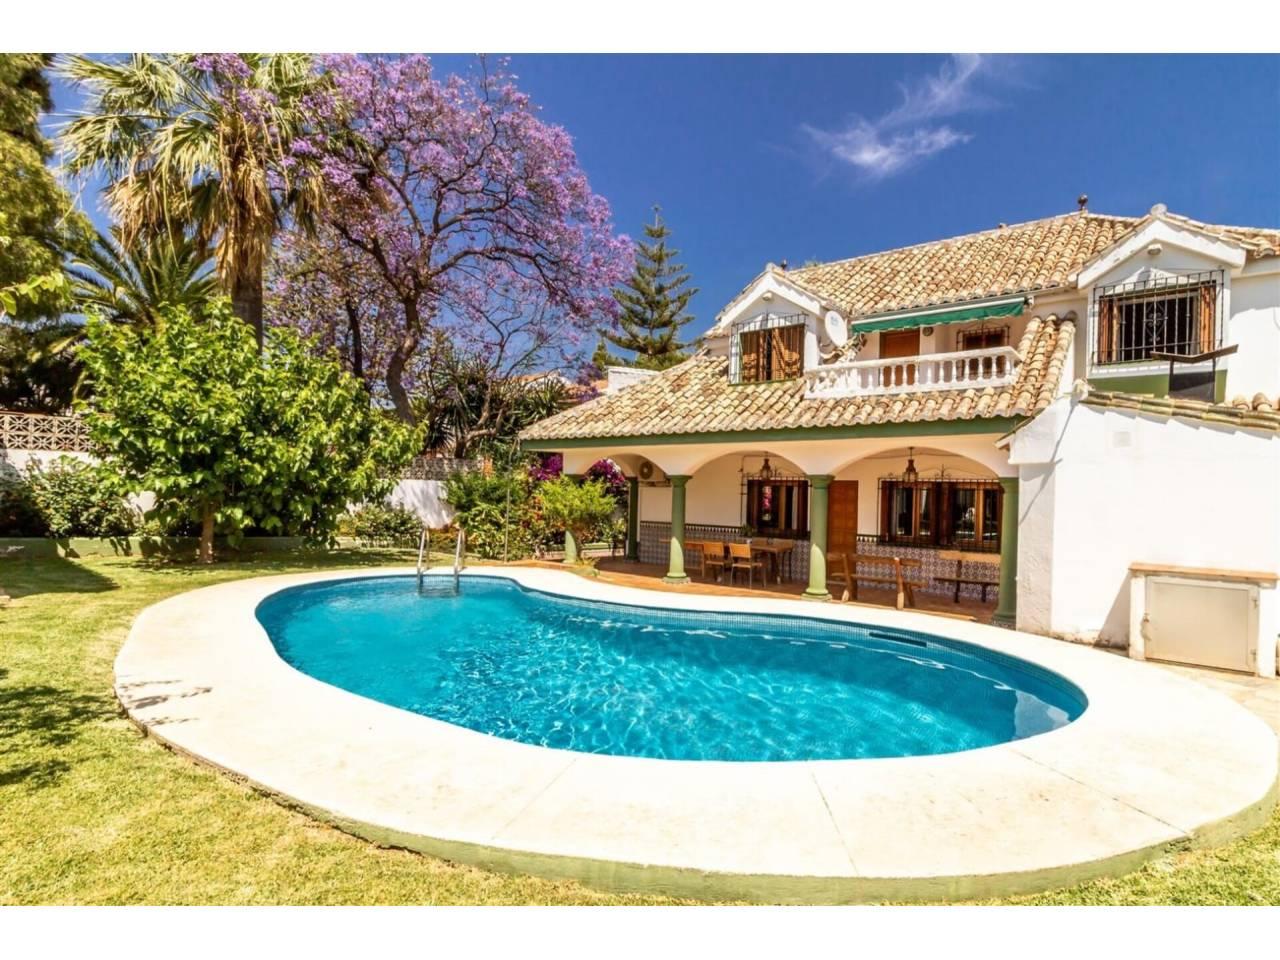 HOUSE IN THE CENTER OF MARBELLA